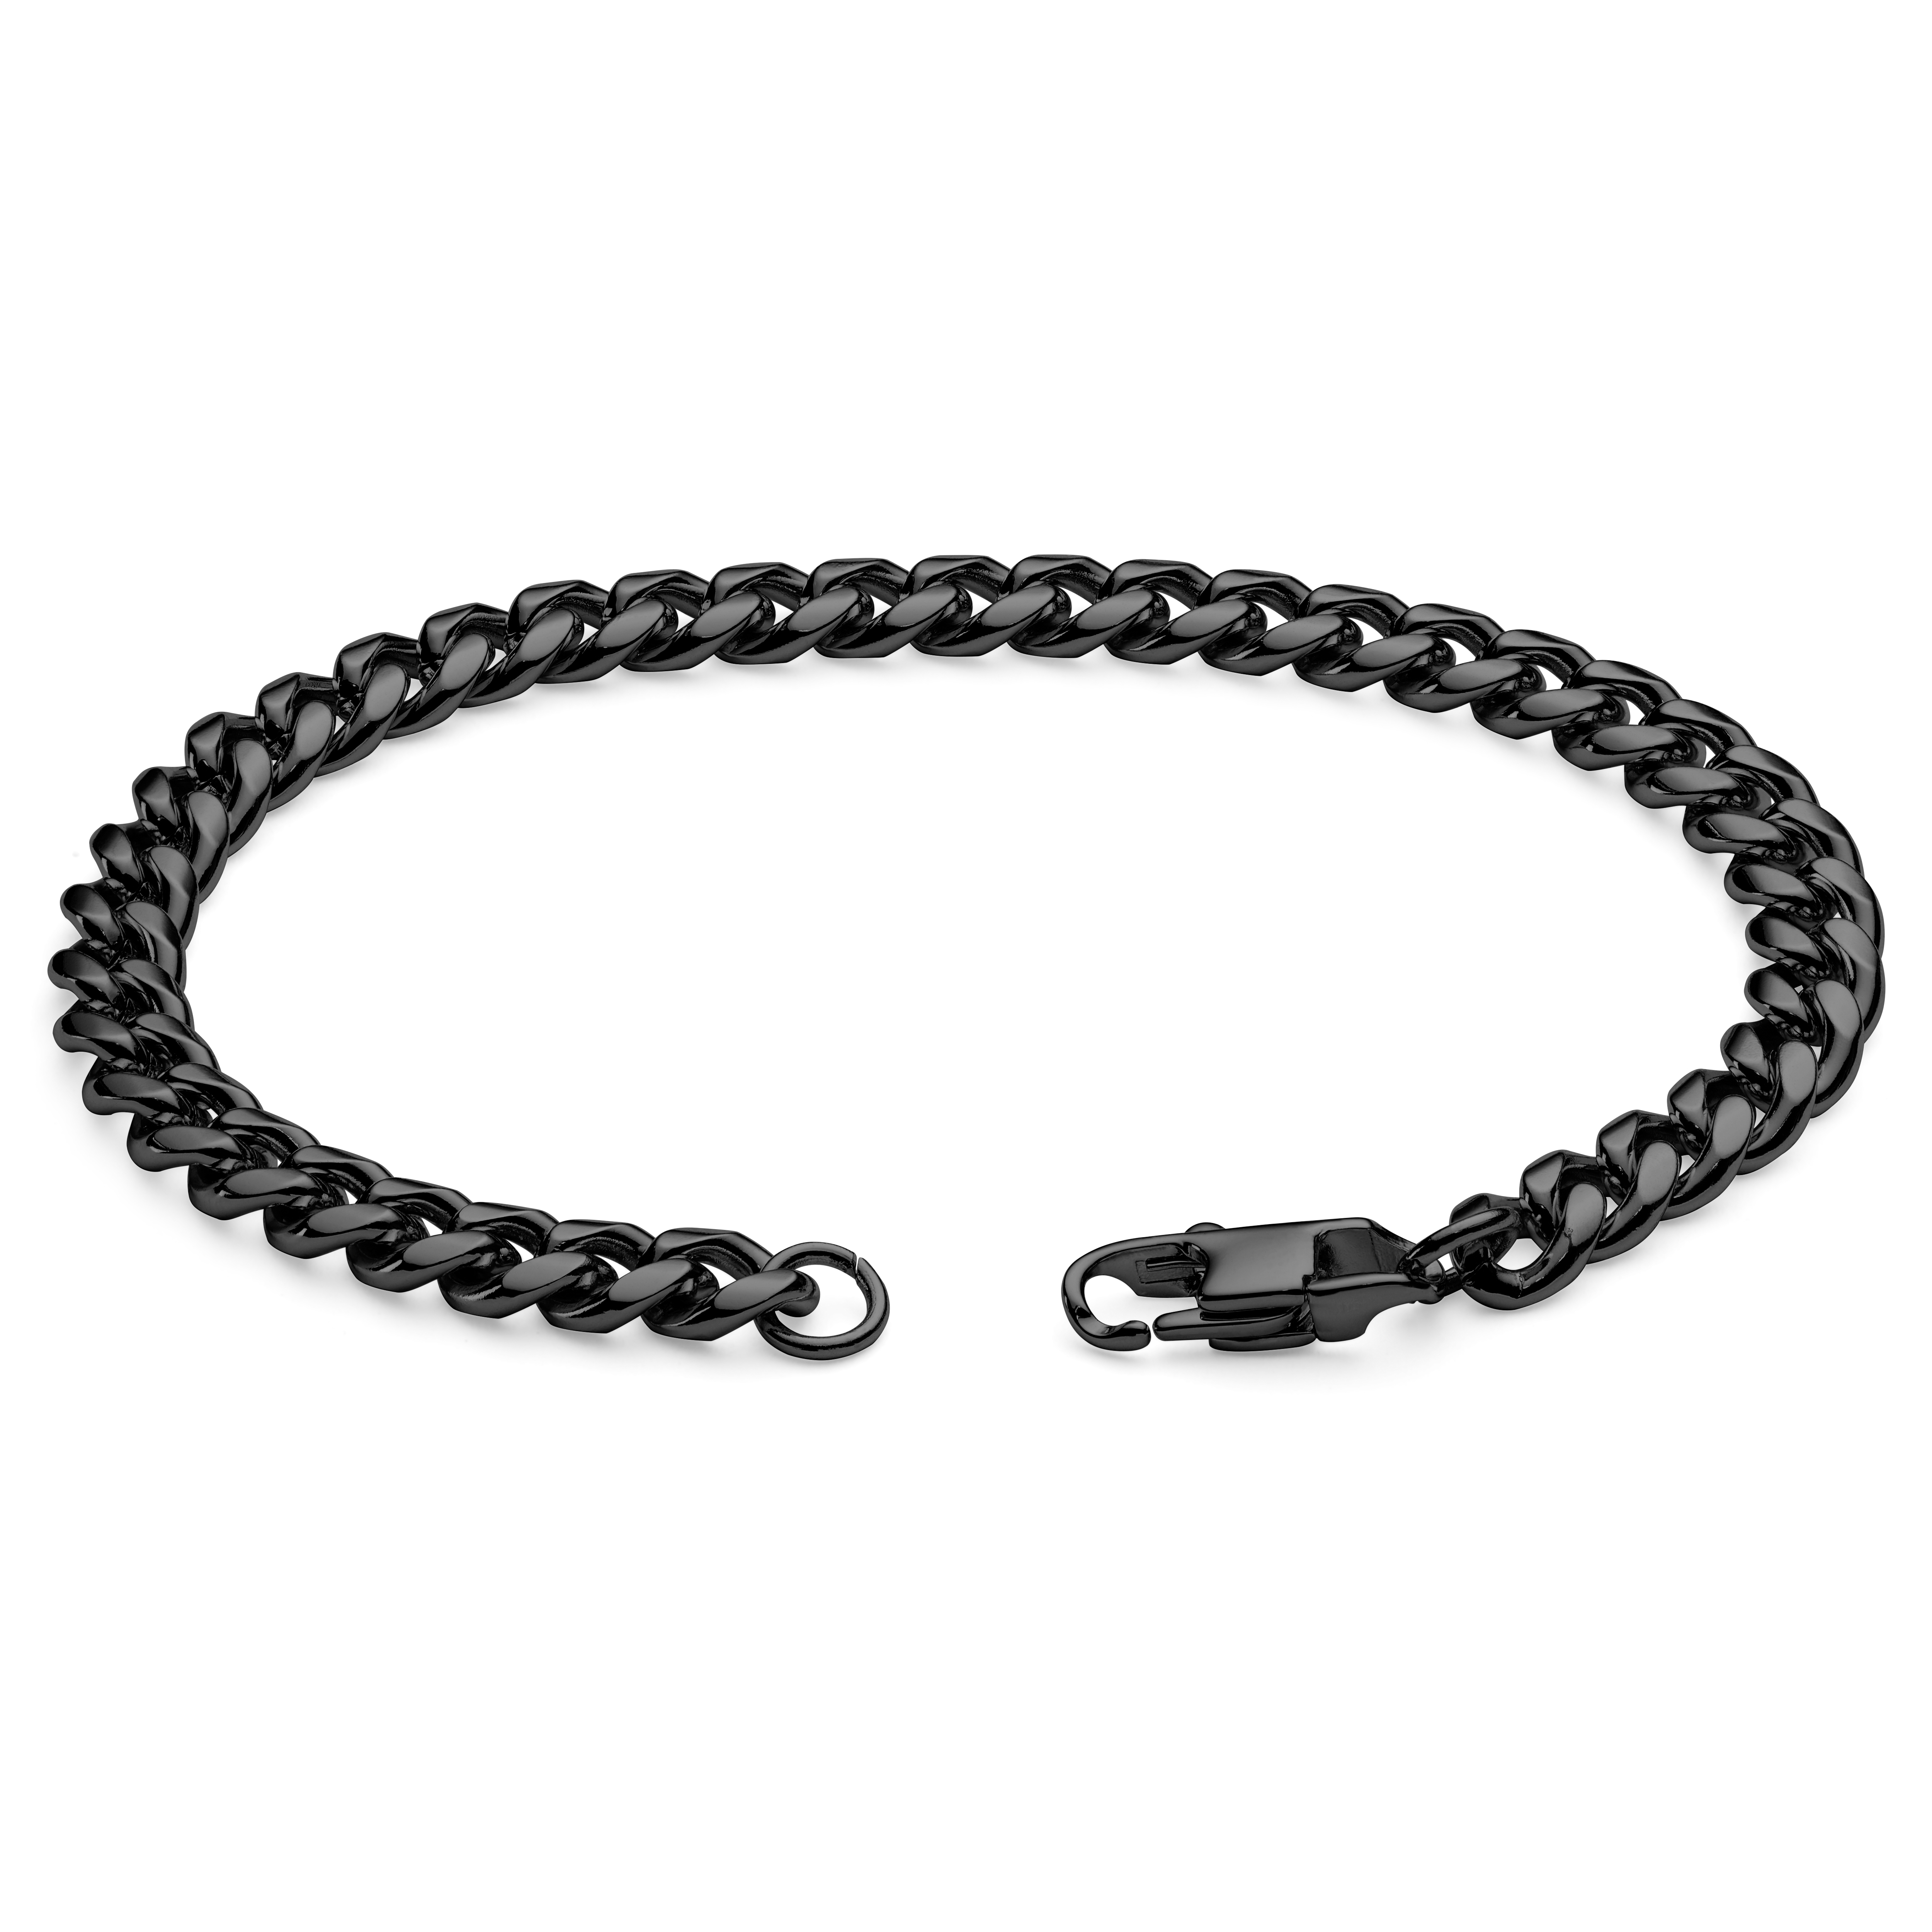 6mm Black Stainless Steel Curb Chain Bracelet